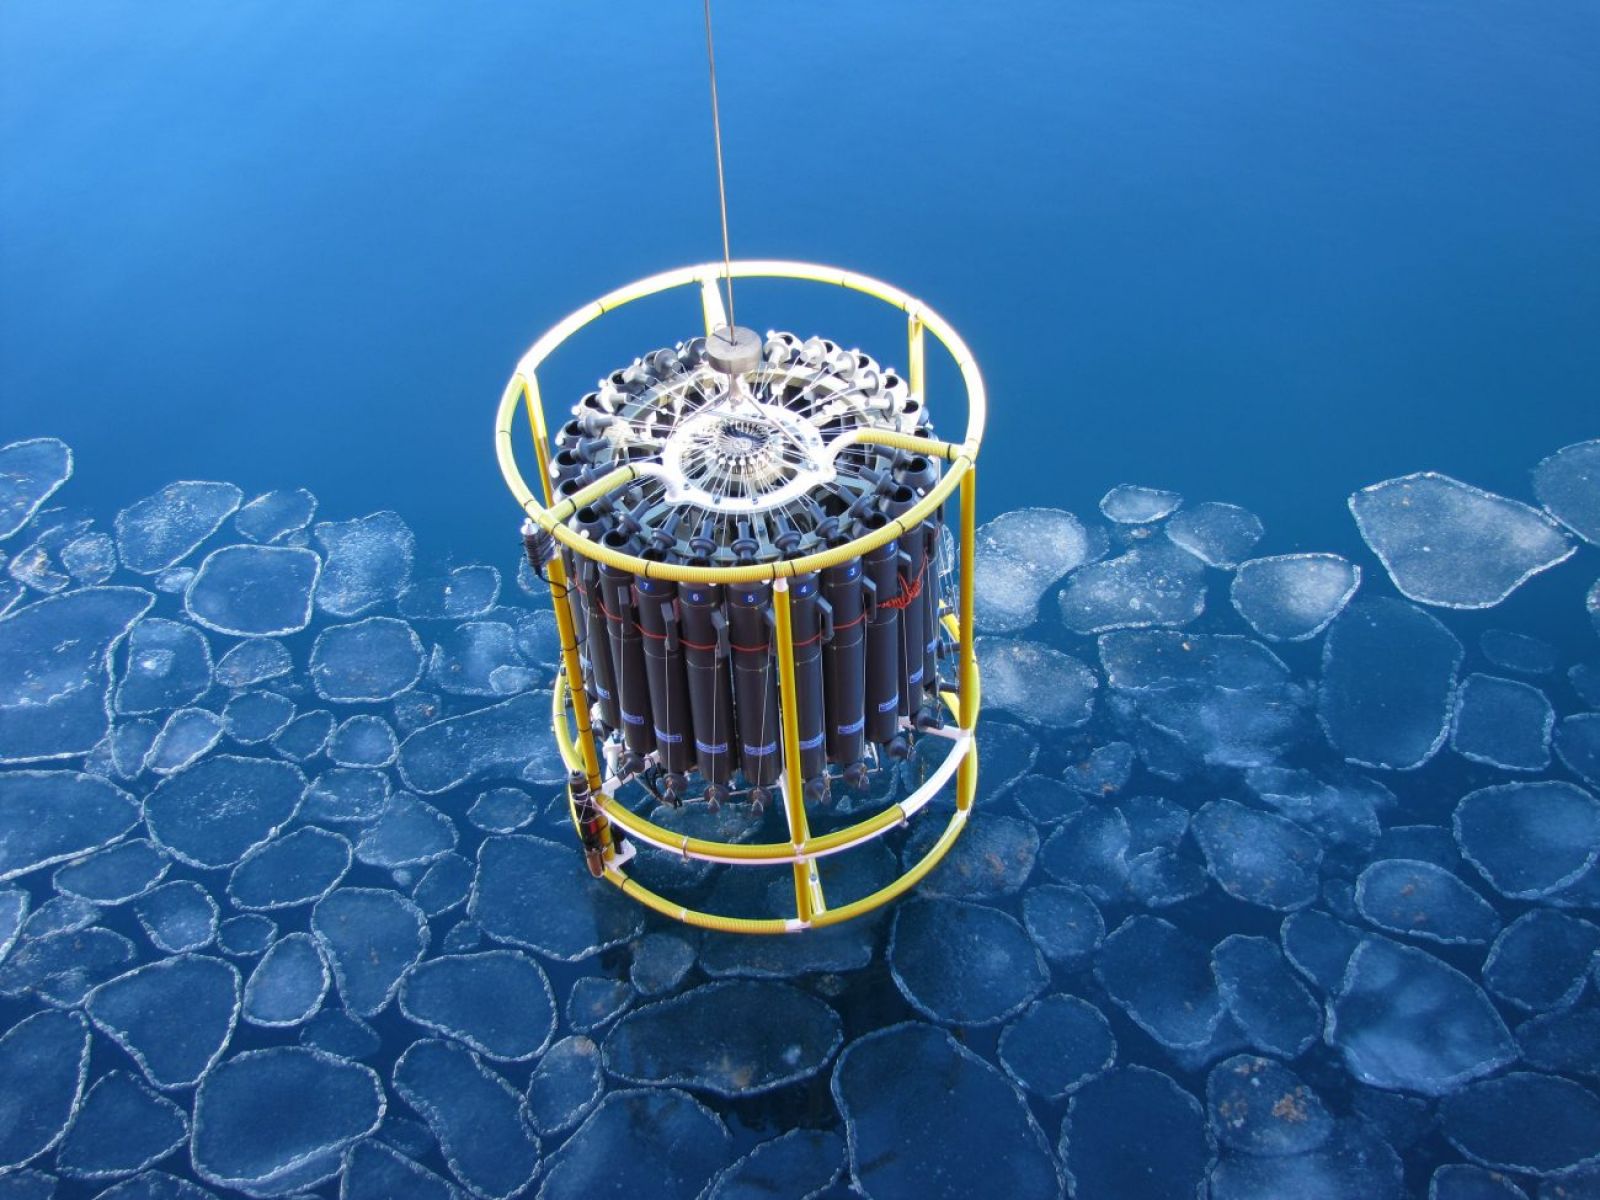 Scientific equipment being lowered into icy water